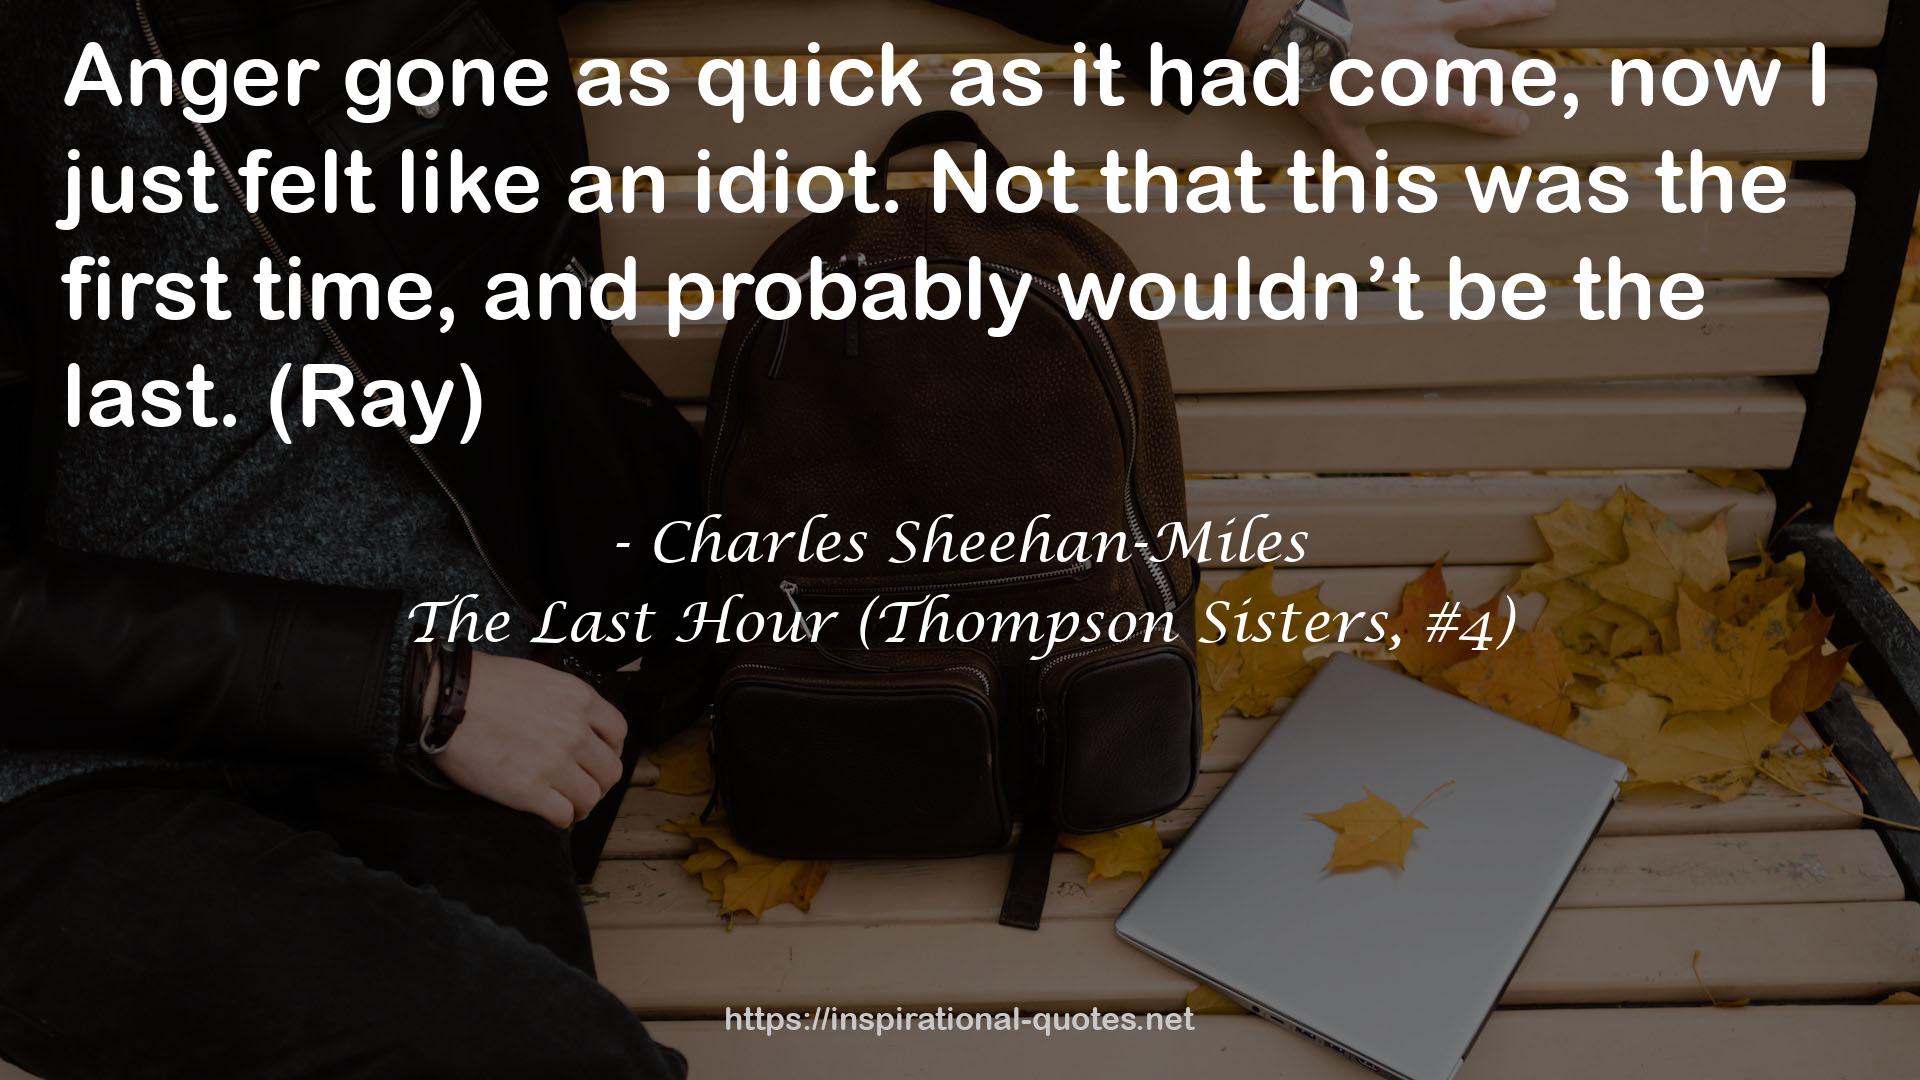 The Last Hour (Thompson Sisters, #4) QUOTES